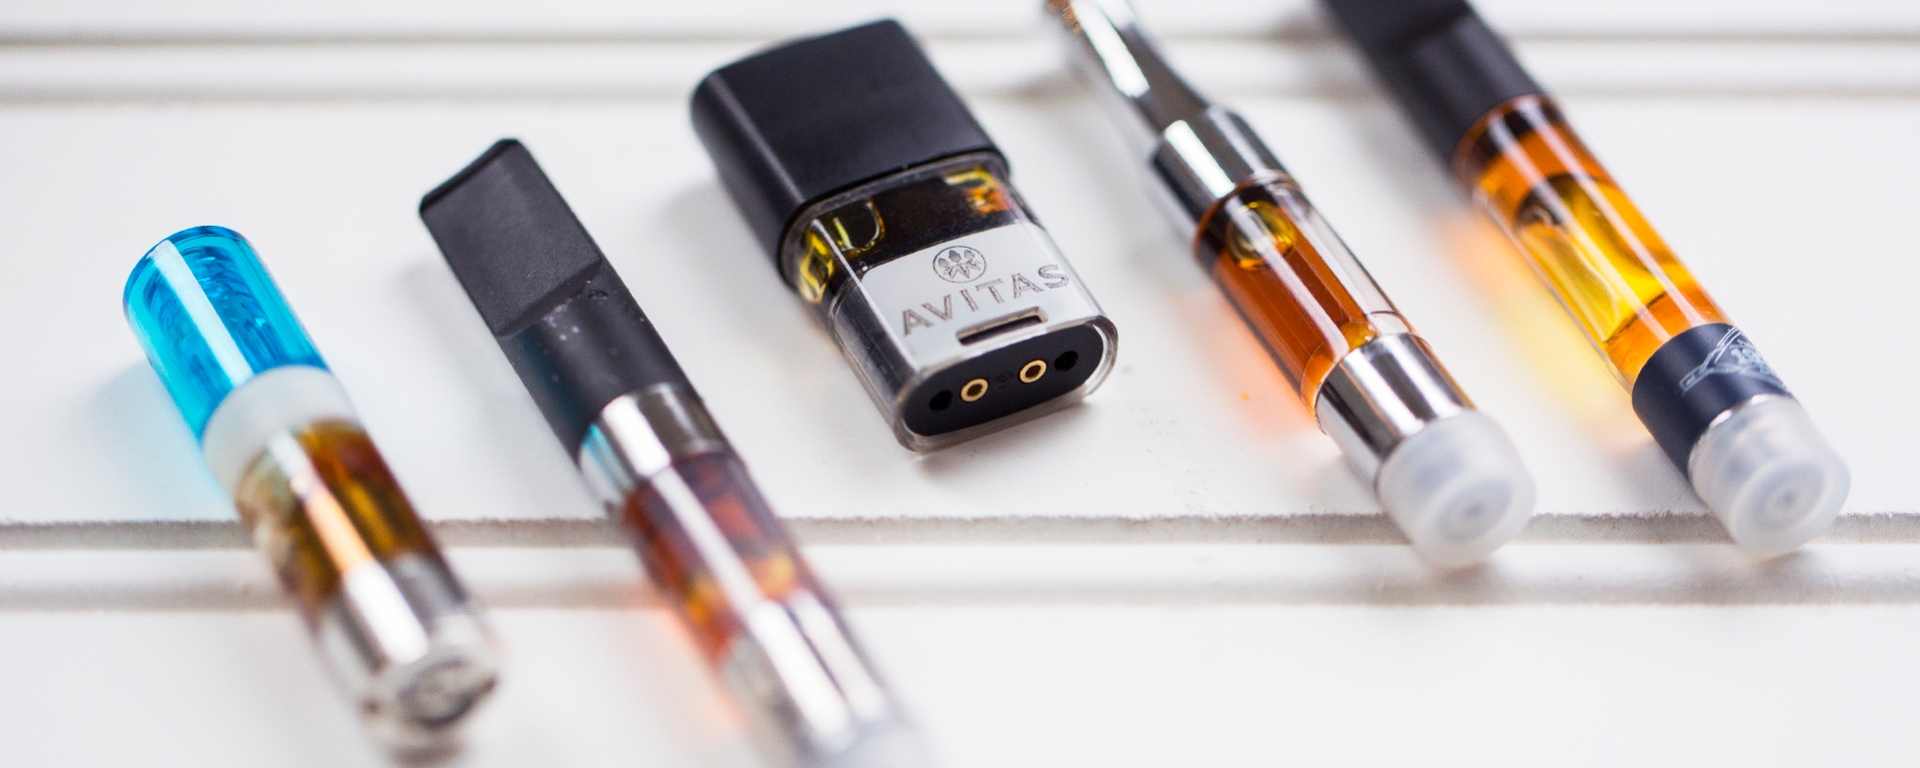 How to Get the Most Oil out of Your Vape | HeyHelloHigh